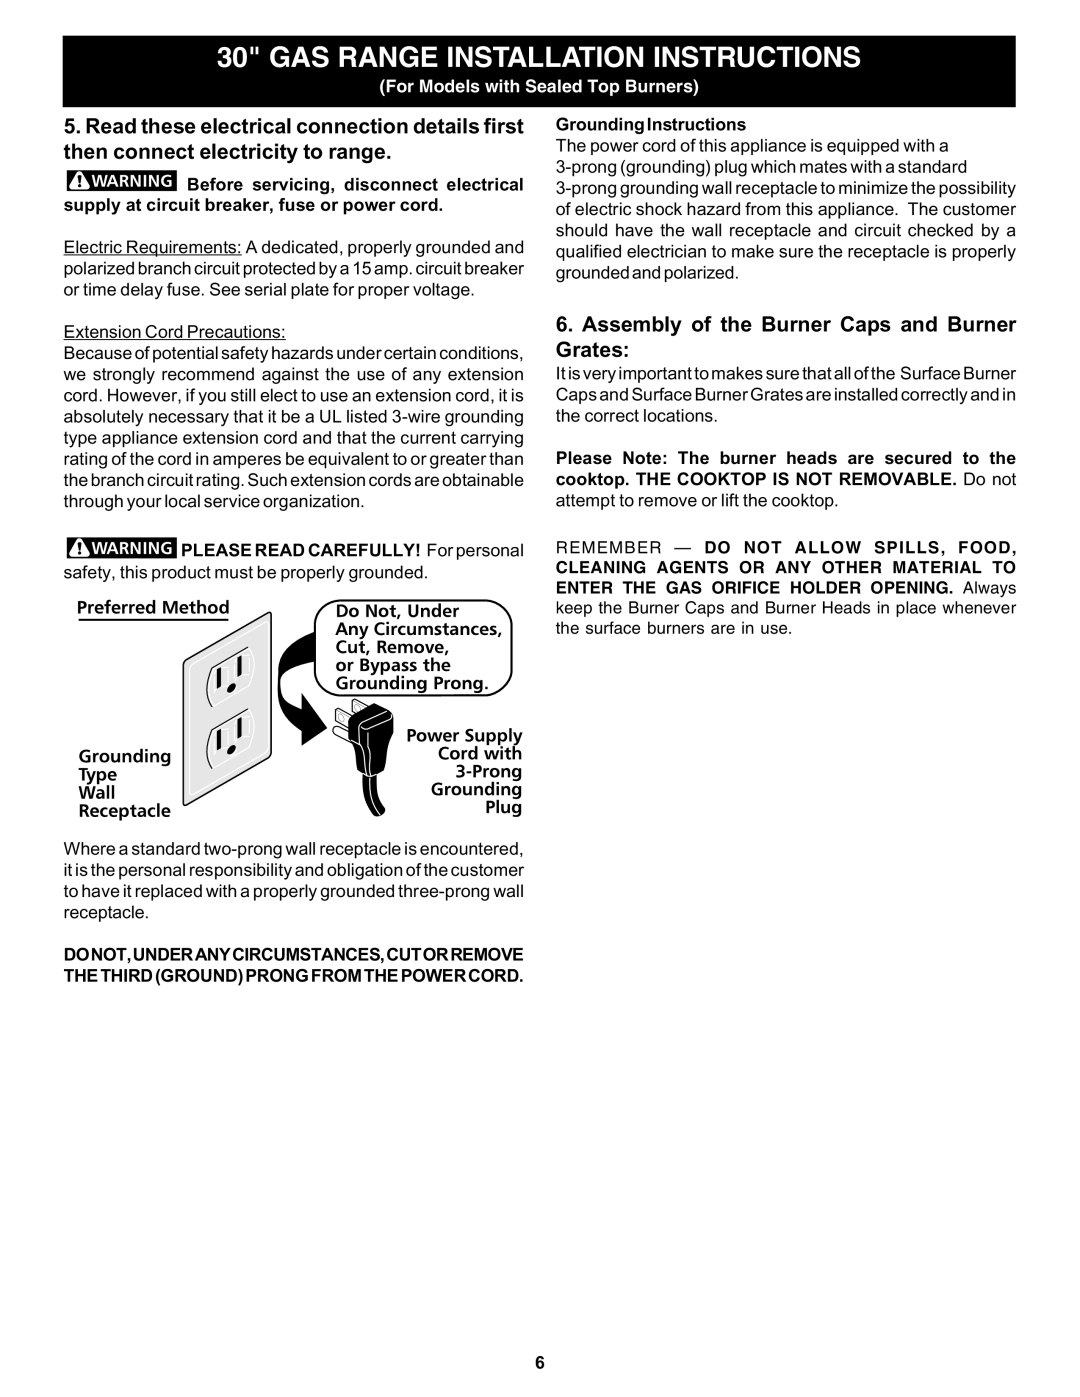 Bosch Appliances HGS5053UC manual Gas Range Installation Instructions, Assembly of the Burner Caps and Burner Grates 